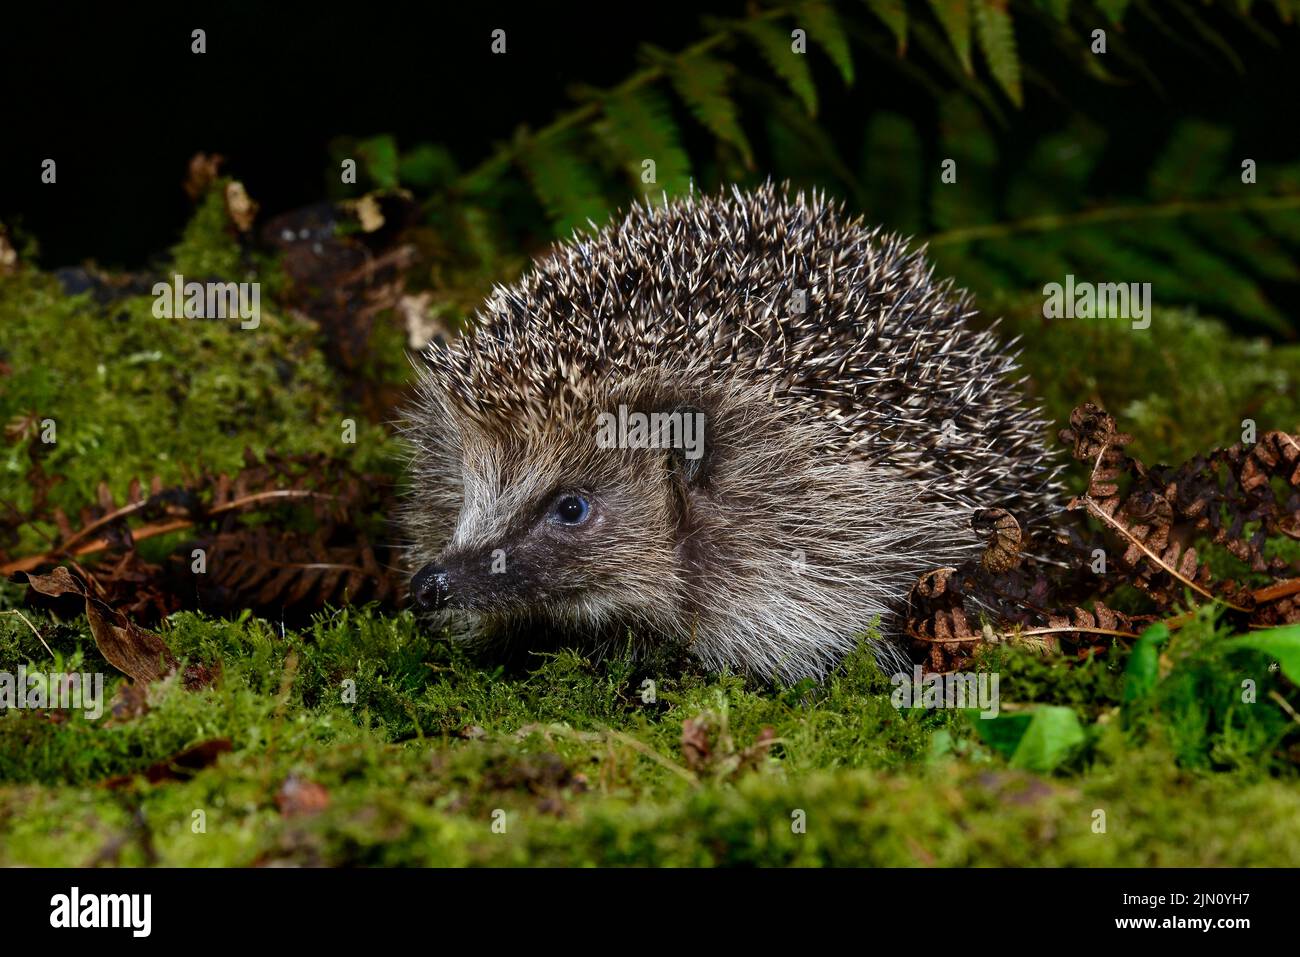 Hedgehog foraging in mossy undergrowth Stock Photo